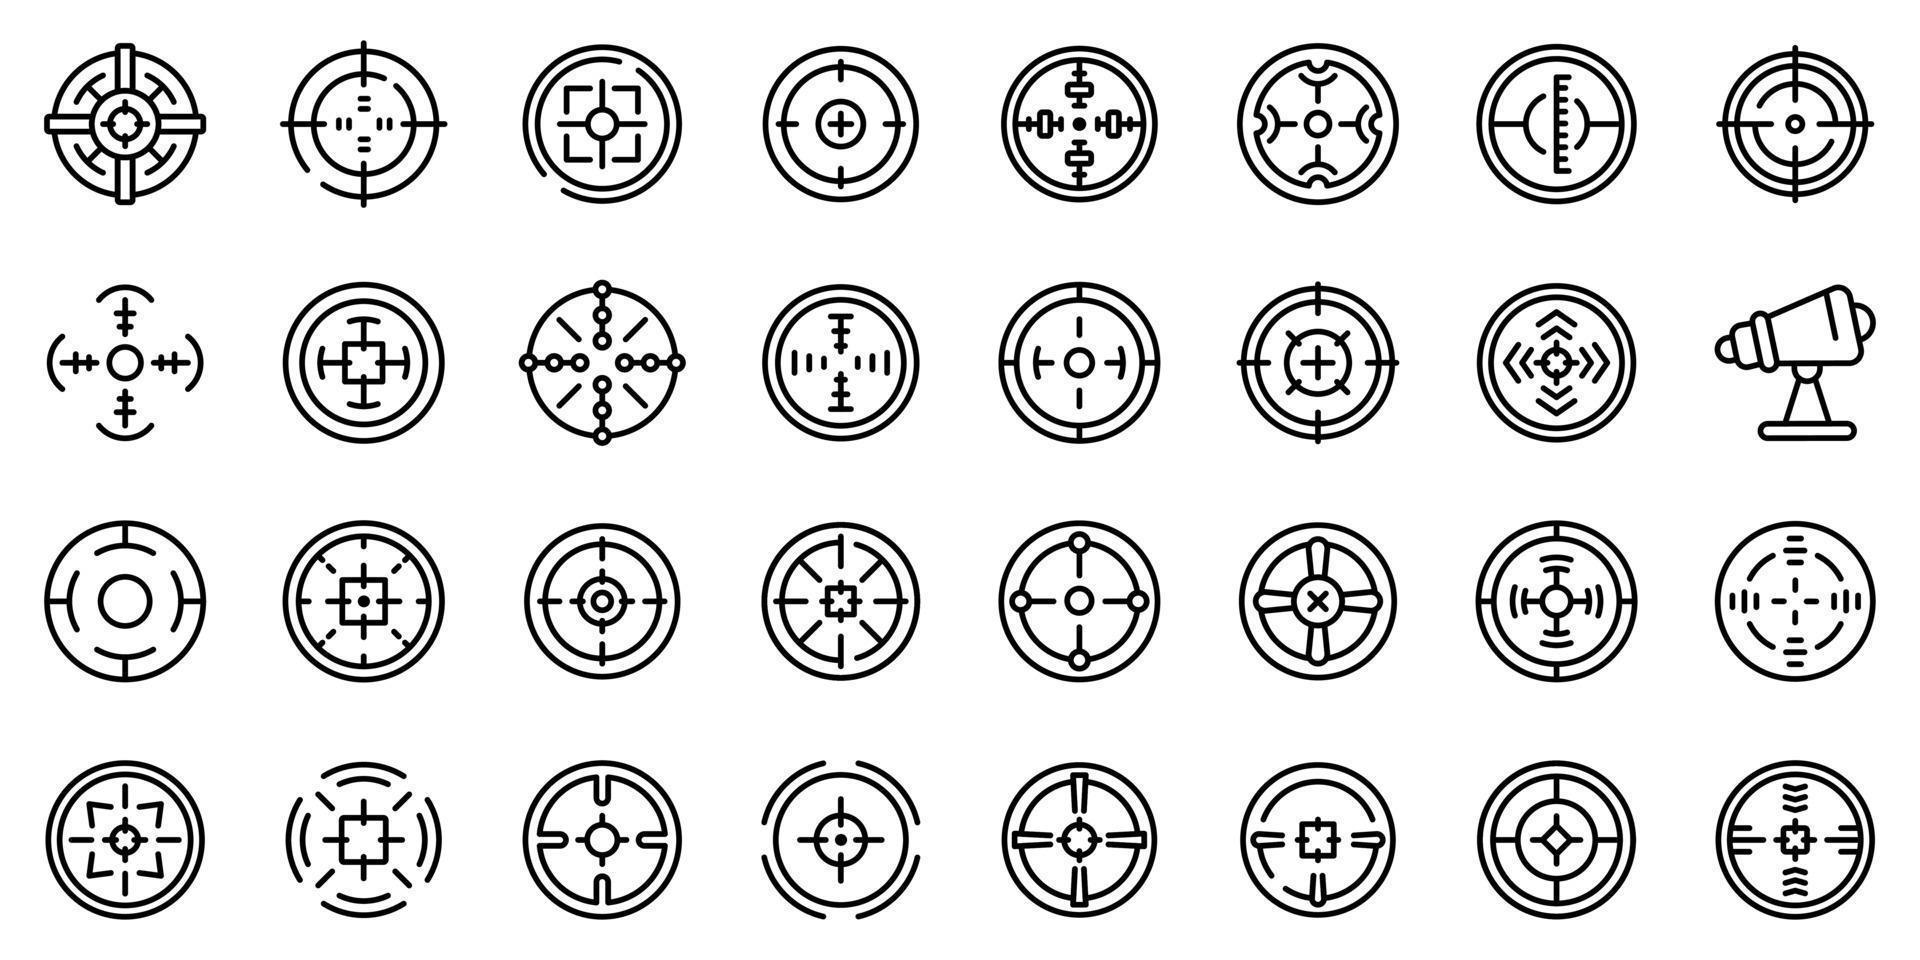 Telescopic sight icons set, outline style vector